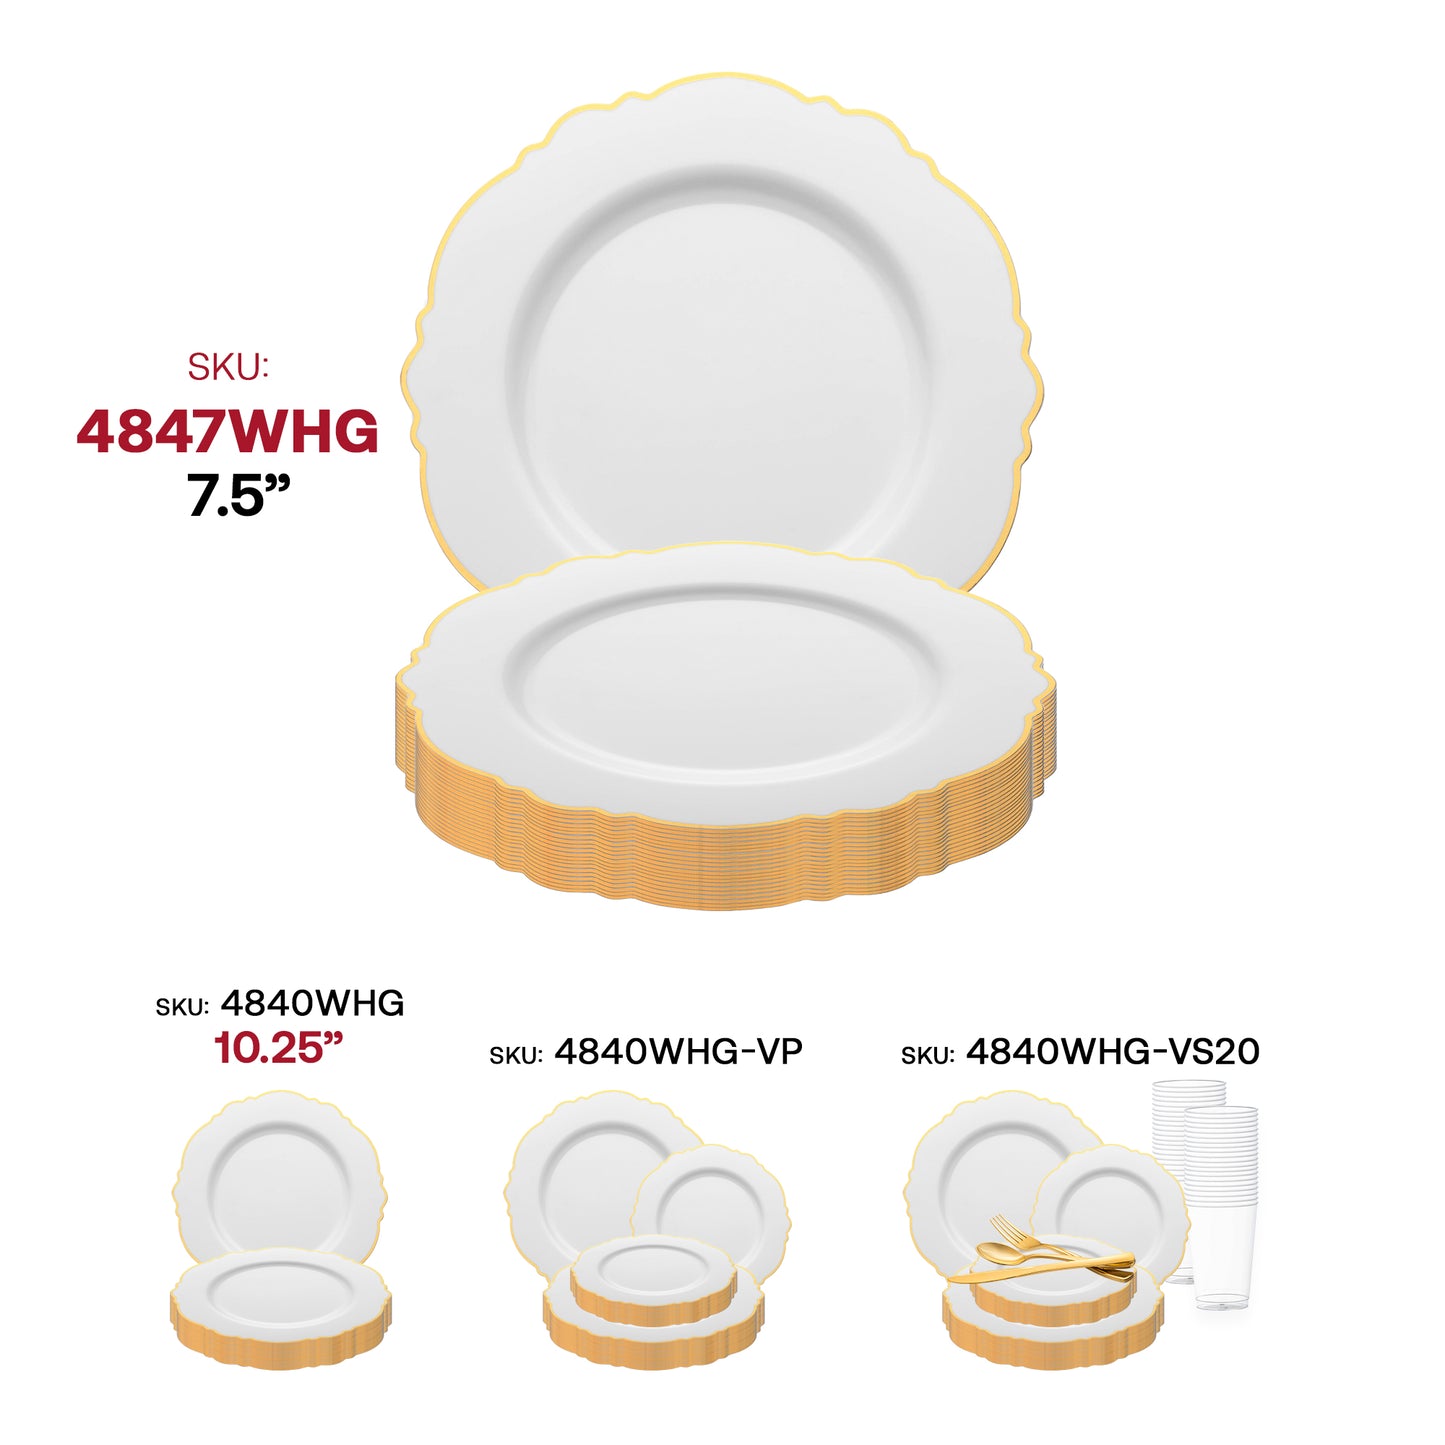 White with Gold Rim Round Blossom Disposable Plastic Appetizer/Salad Plates (7.5") SKU | The Kaya Collection